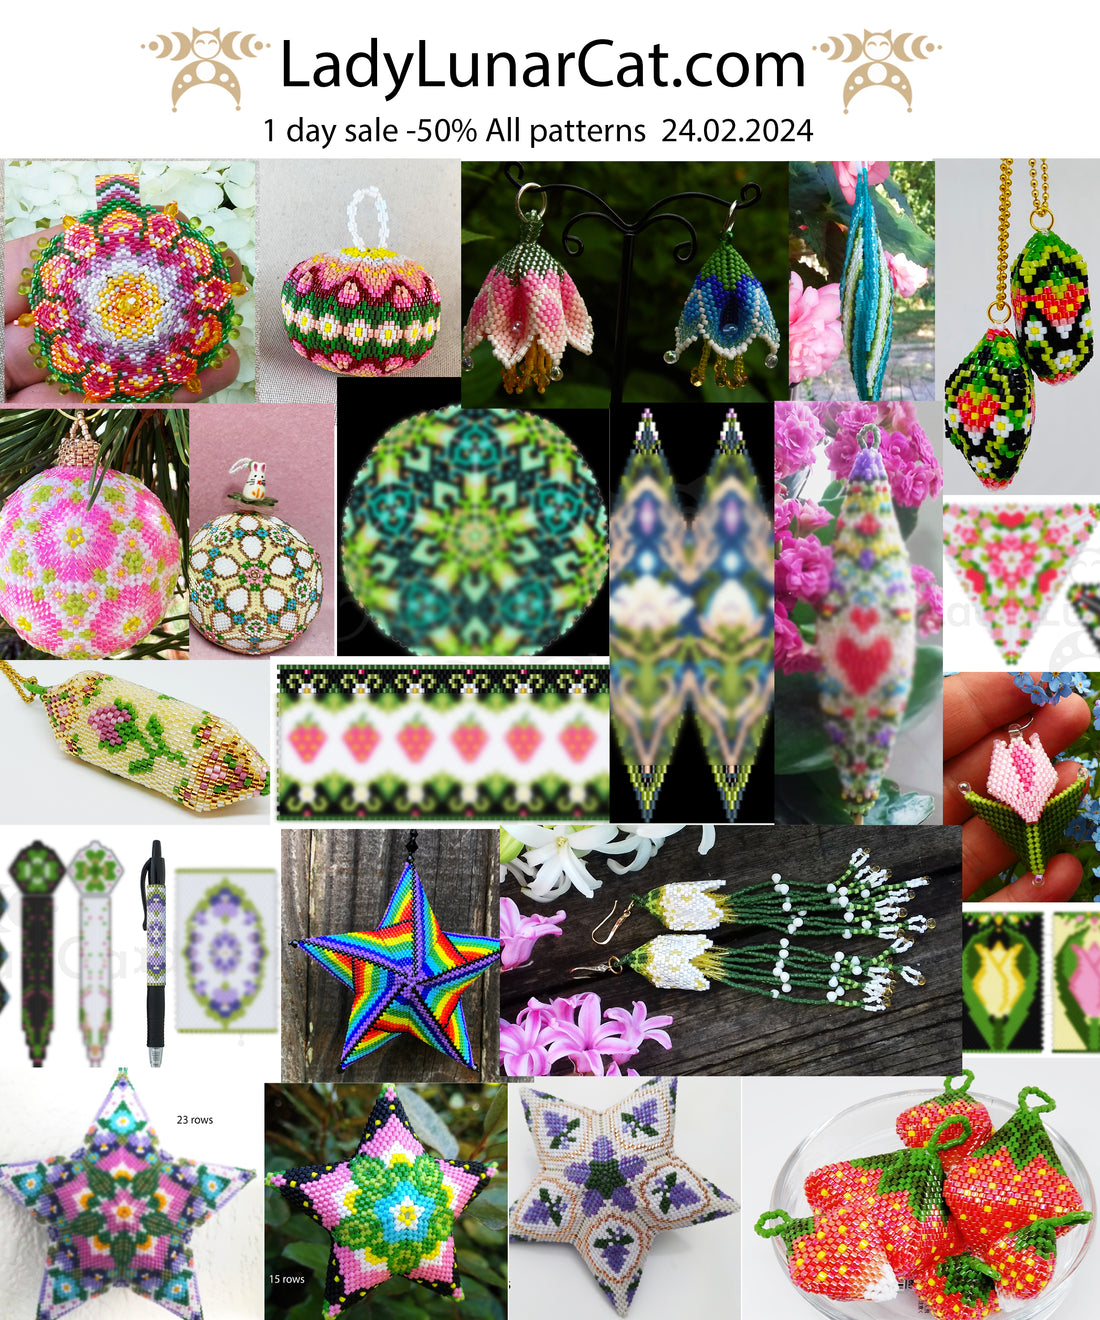 1 day sale -50% All patterns  24.02.2023 discount will be visible in the shopping cart